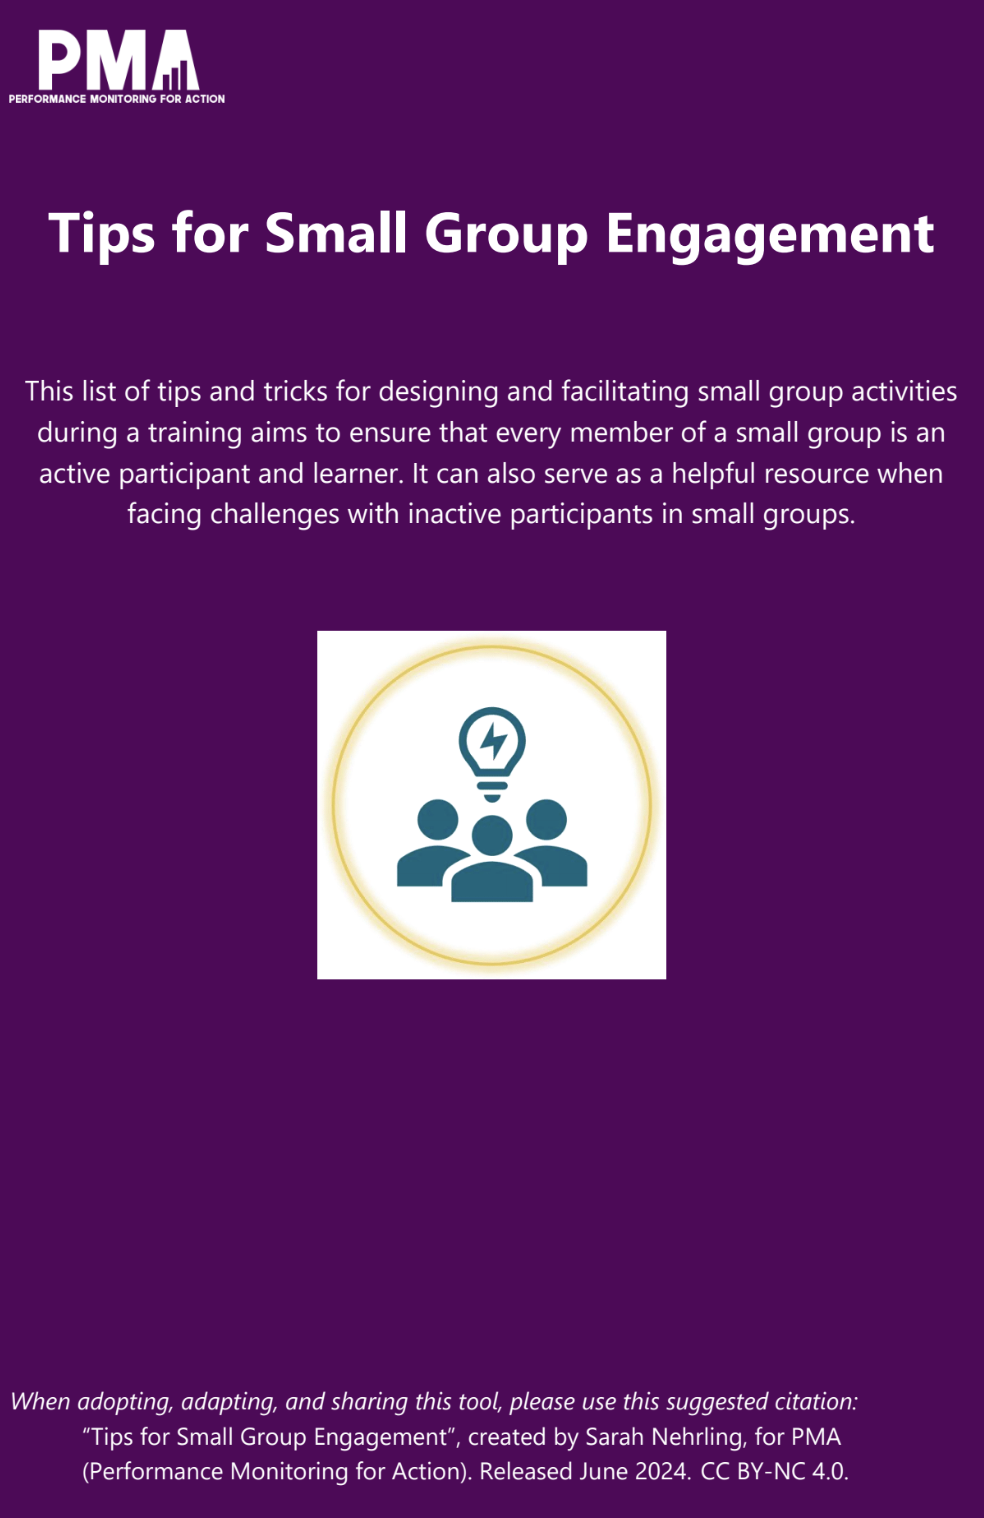 Tips for Small Group Engagement